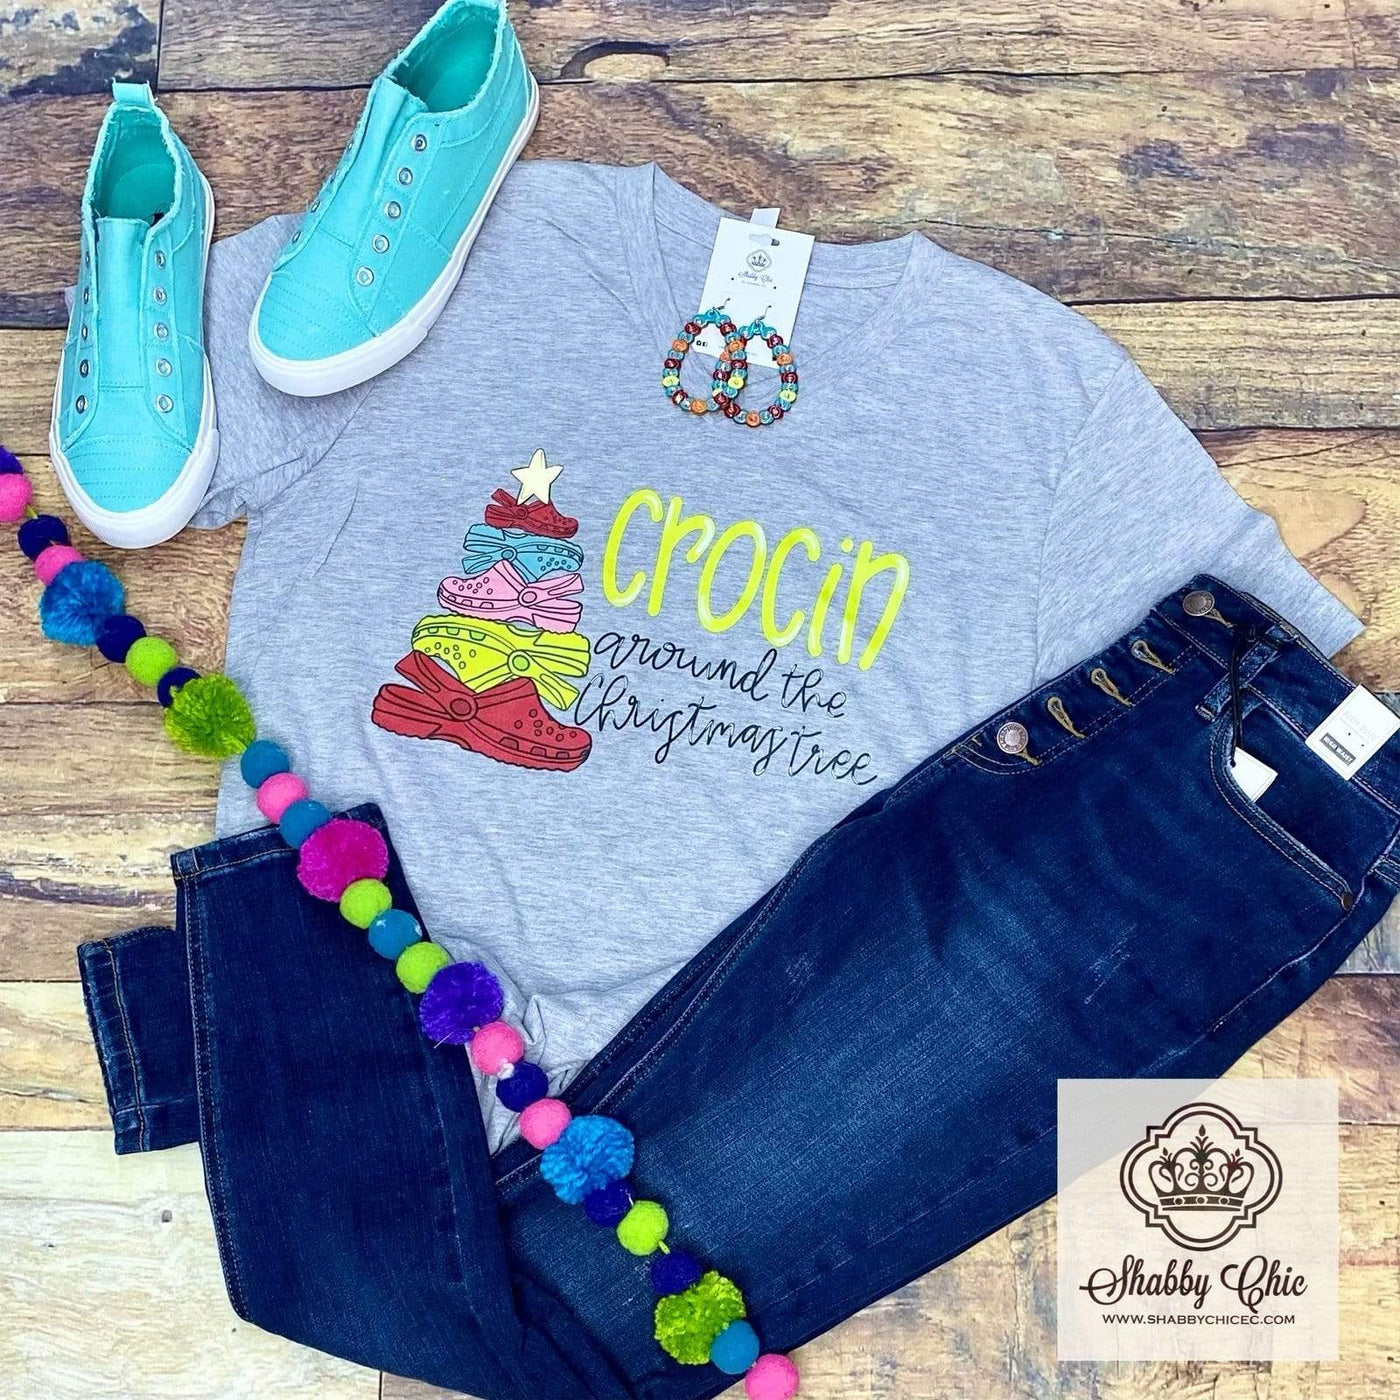 Crocin Around The Christmas Tree Tee Shabby Chic Boutique and Tanning Salon